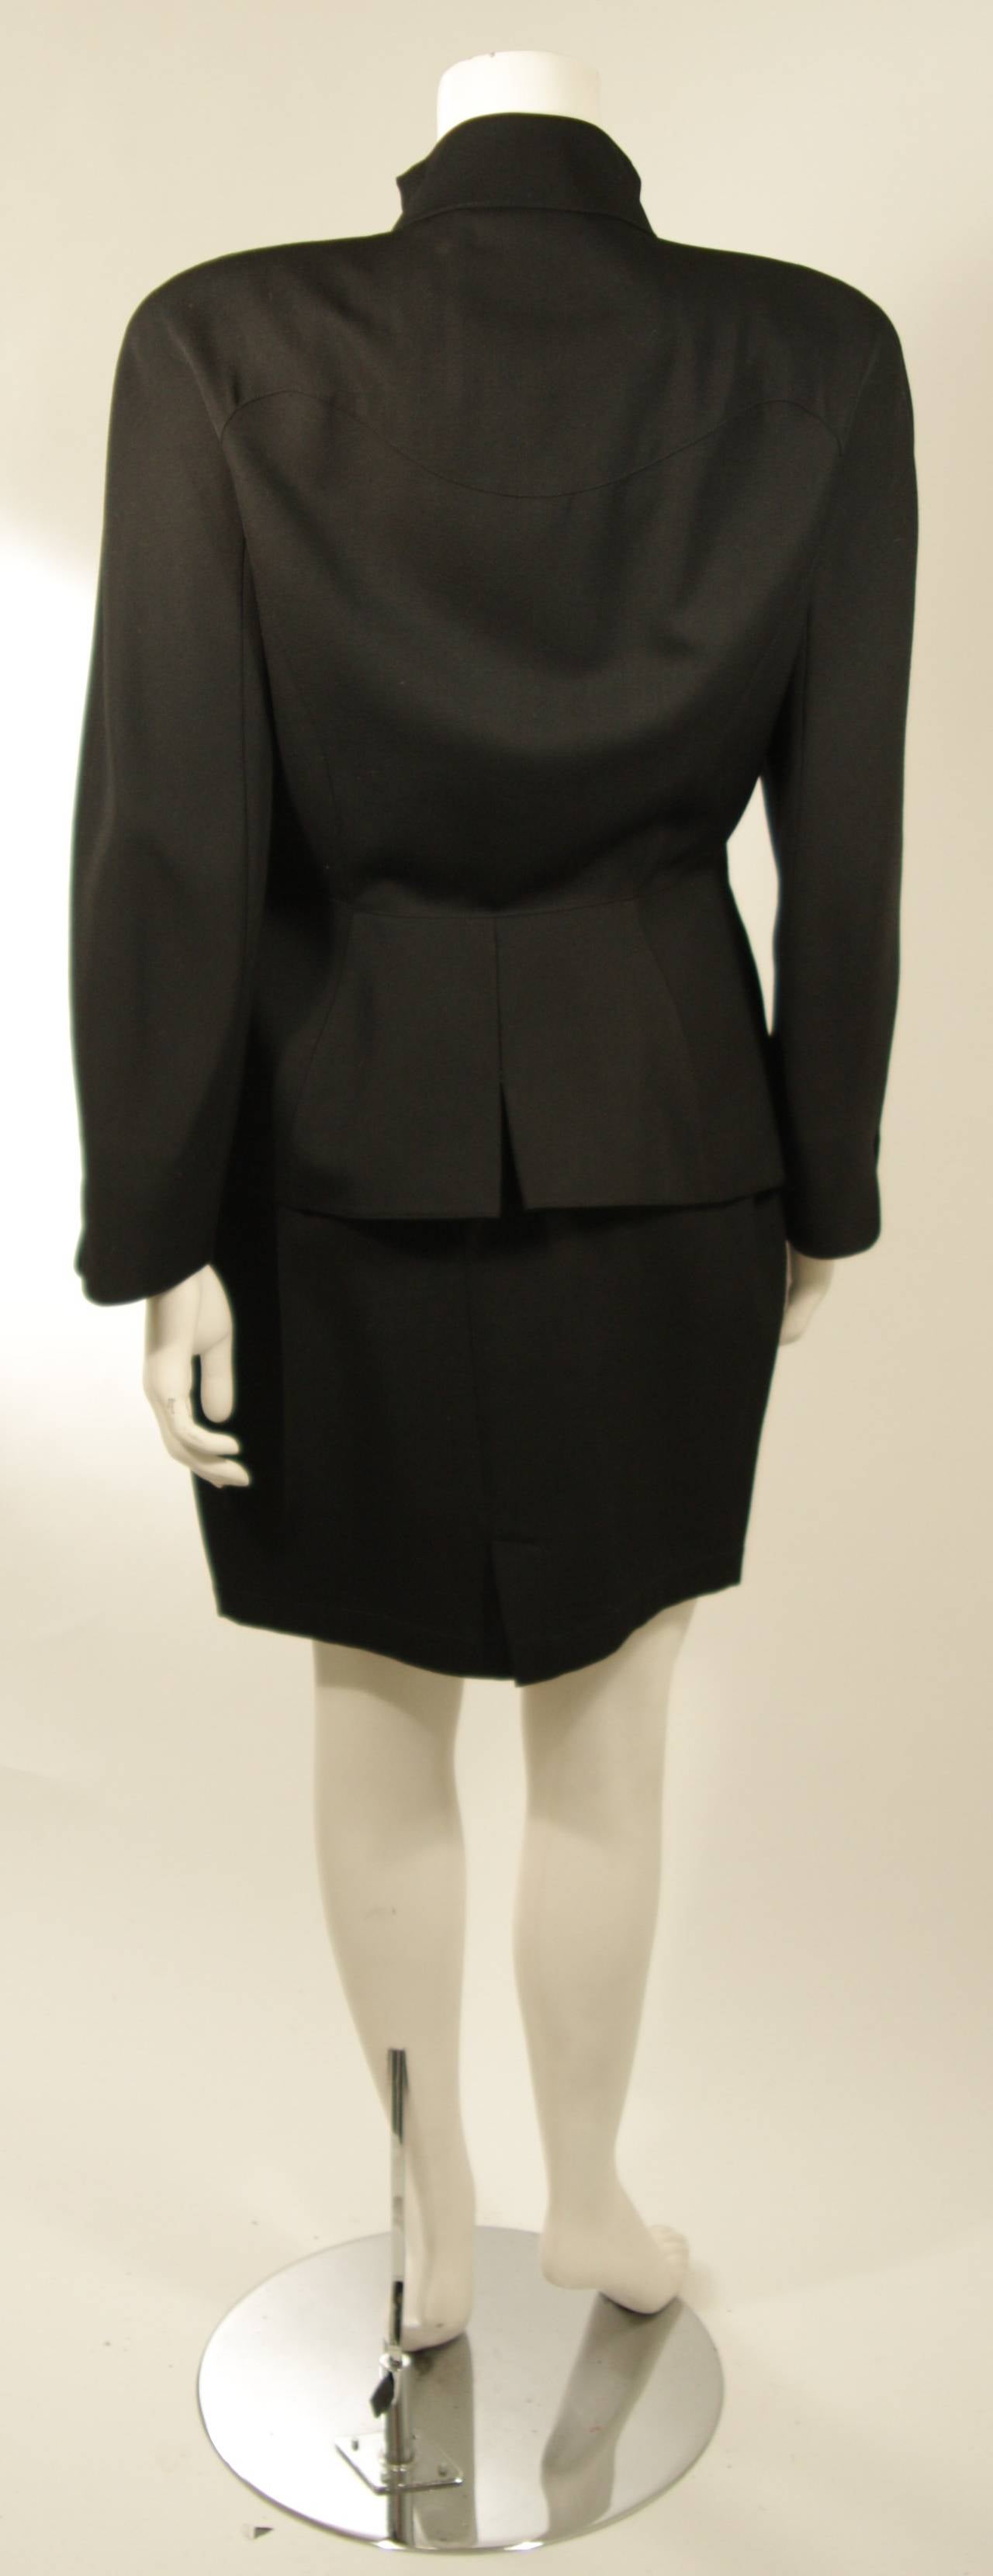 Thierry Mugler Black Skirt Suit with Pyramid Eye Zip Accent Size 44 3